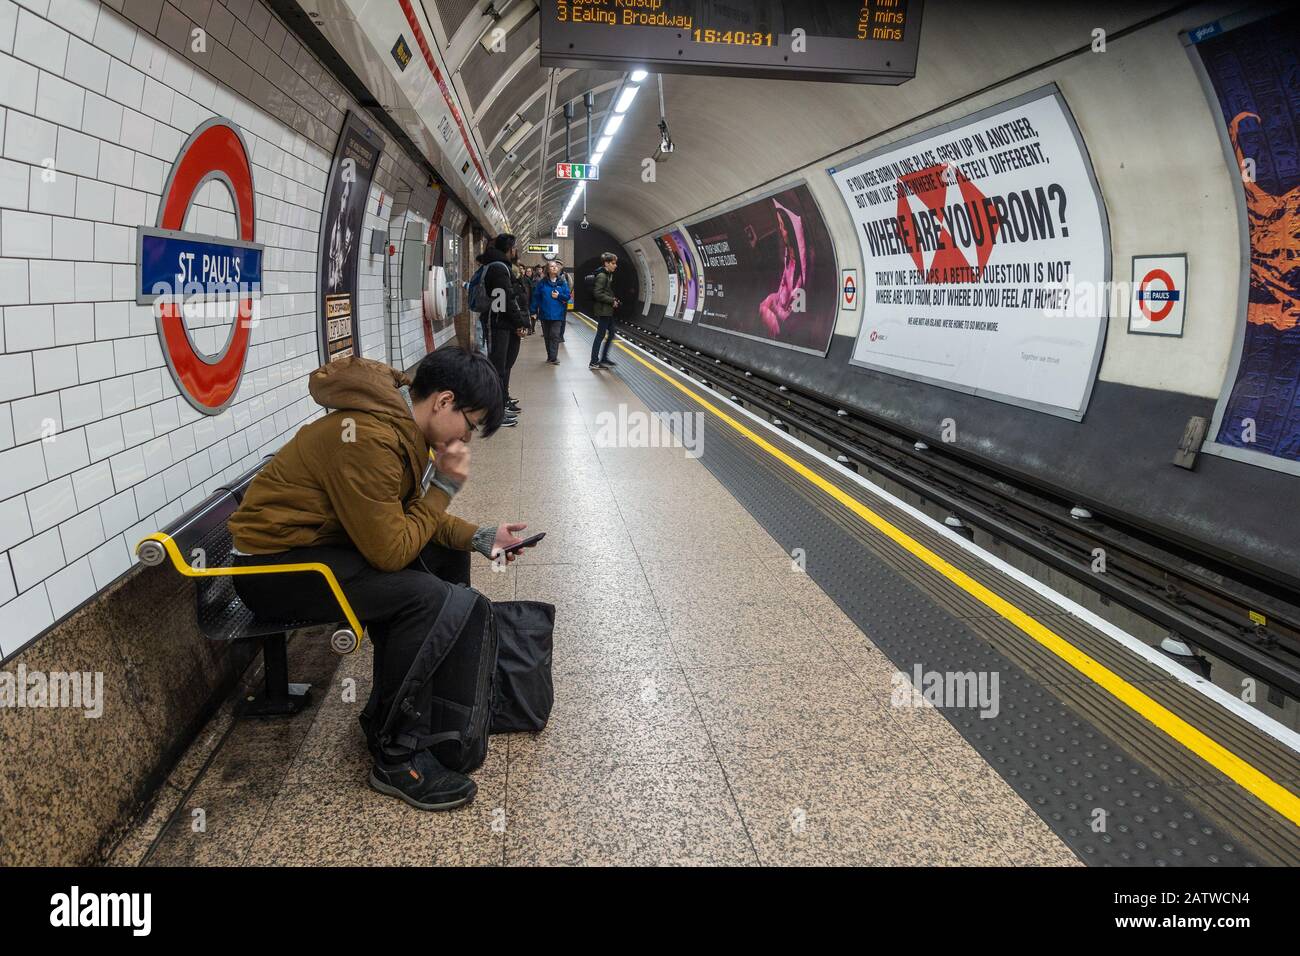 A man sits on a bench and uses his mobile phone as he waits for a train at St Paul's London Underground station. Stock Photo